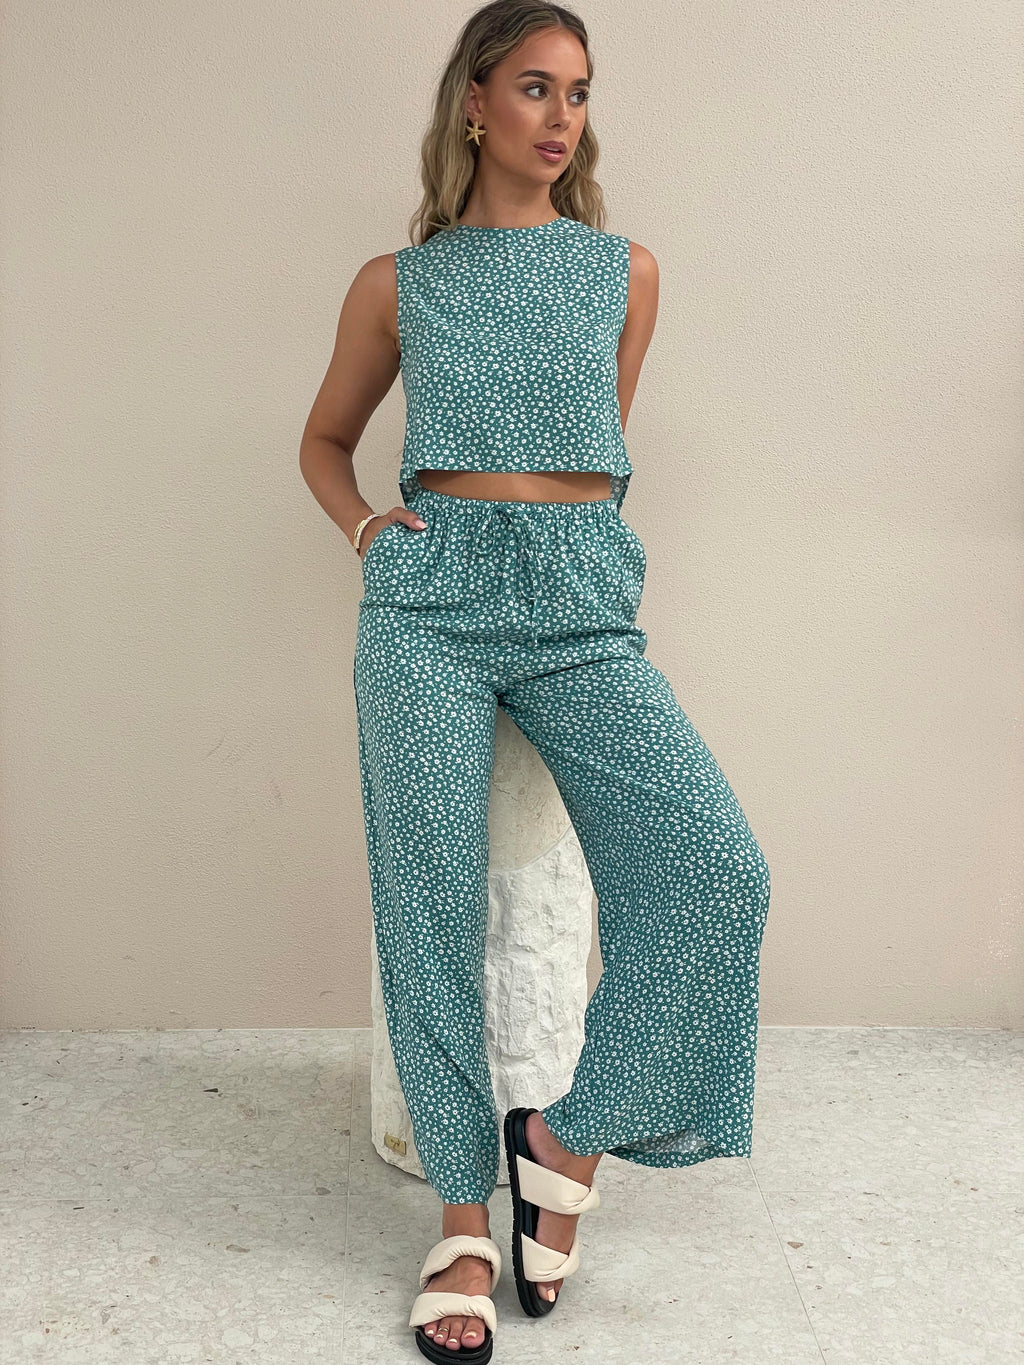 The Glider Pant - Ditzy Green